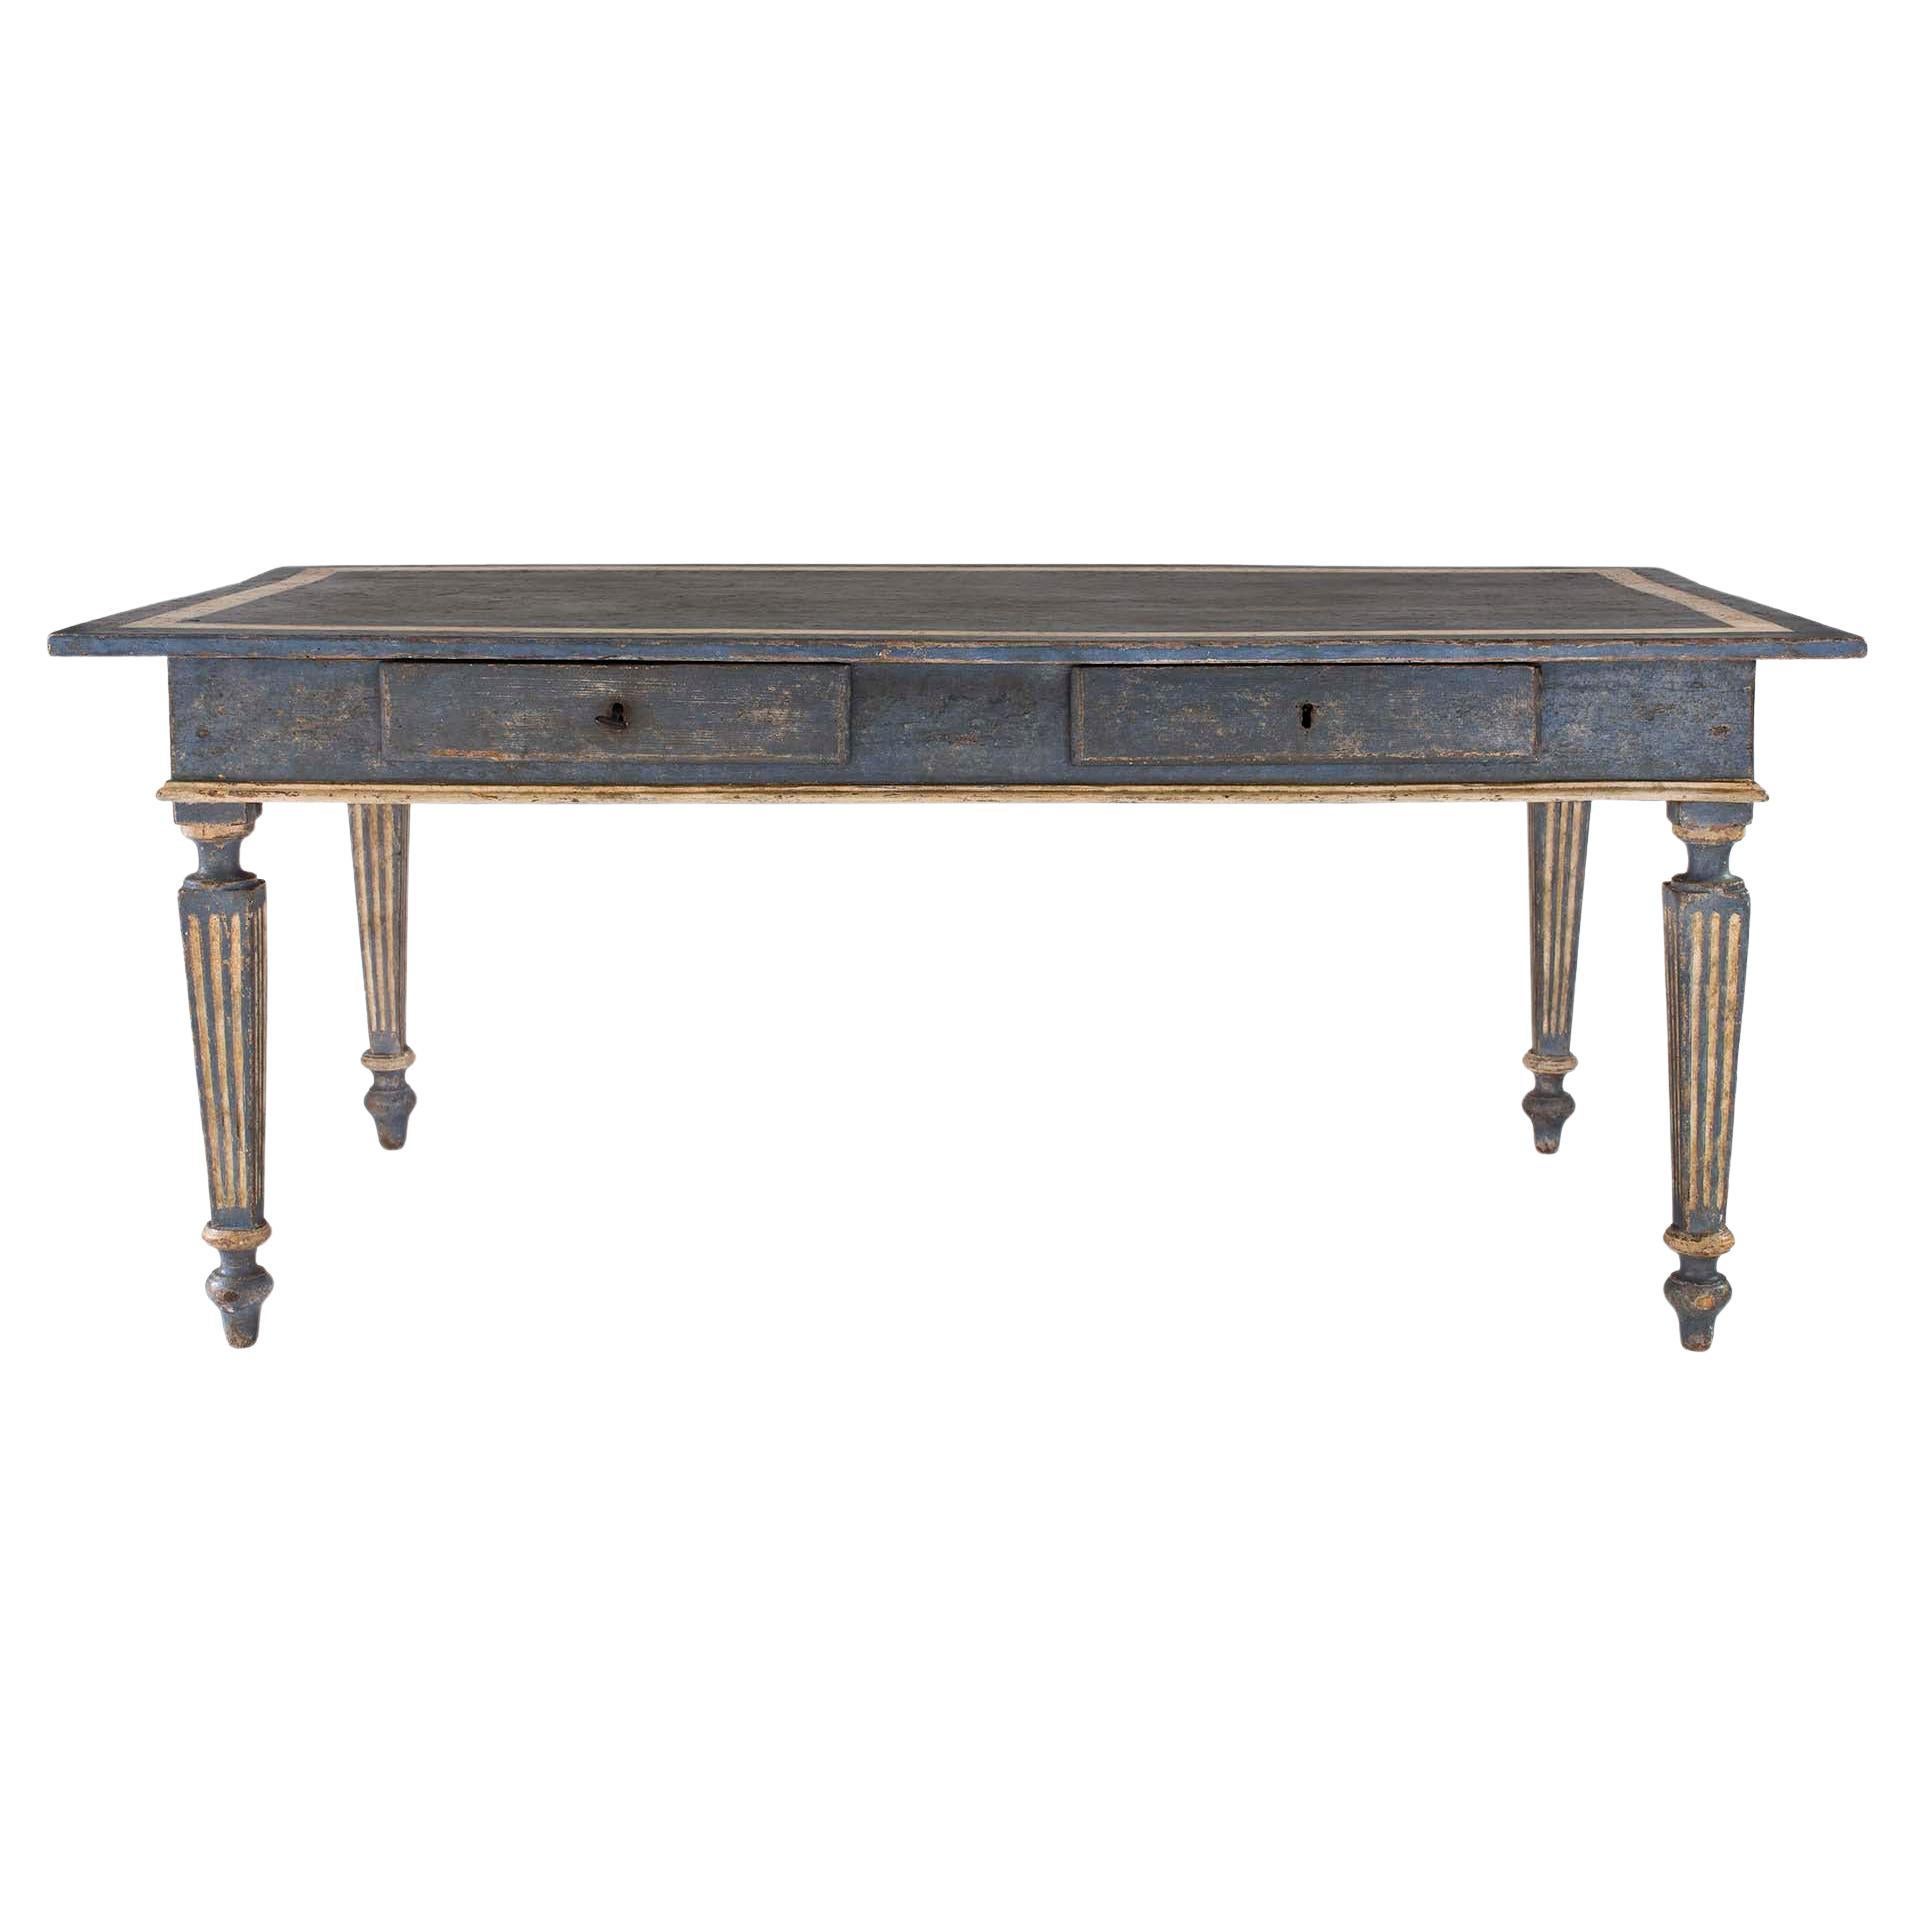 Italian 19th Century Blue Gray and Cream Color Patinated Tuscan Center Table For Sale